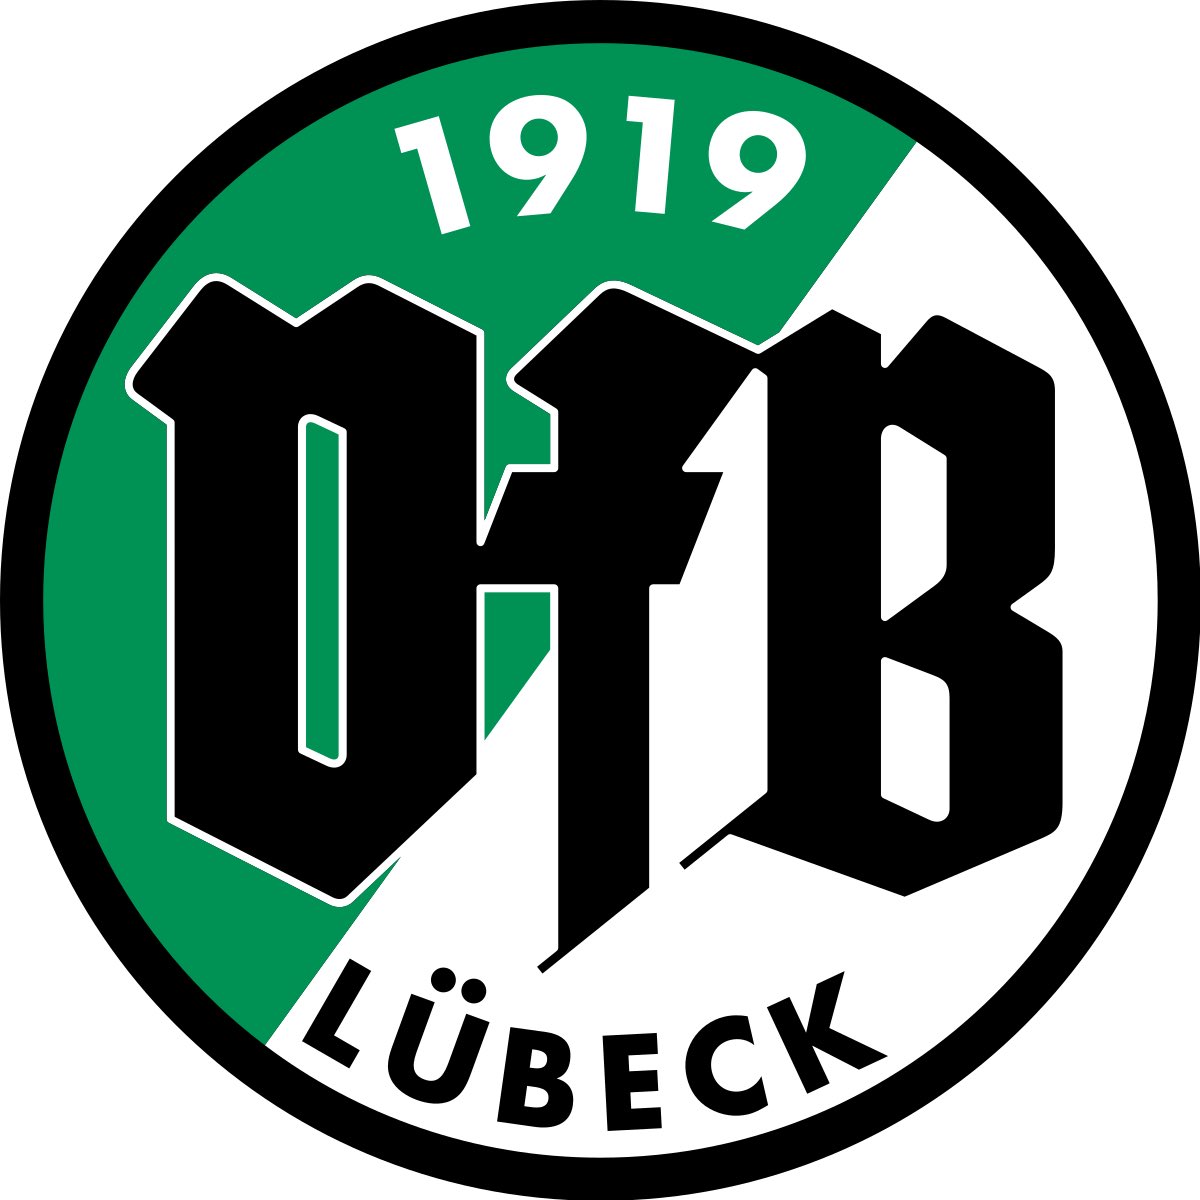 #117 VFB Lubeck 0-1 EFC - Jul 24, 1992. EFC’s pre-season tour of Germany continued with a match against VFB Lubeck. The Blues’ secured another victory with a 1-0 win, Mo Johnston scoring the only goal.